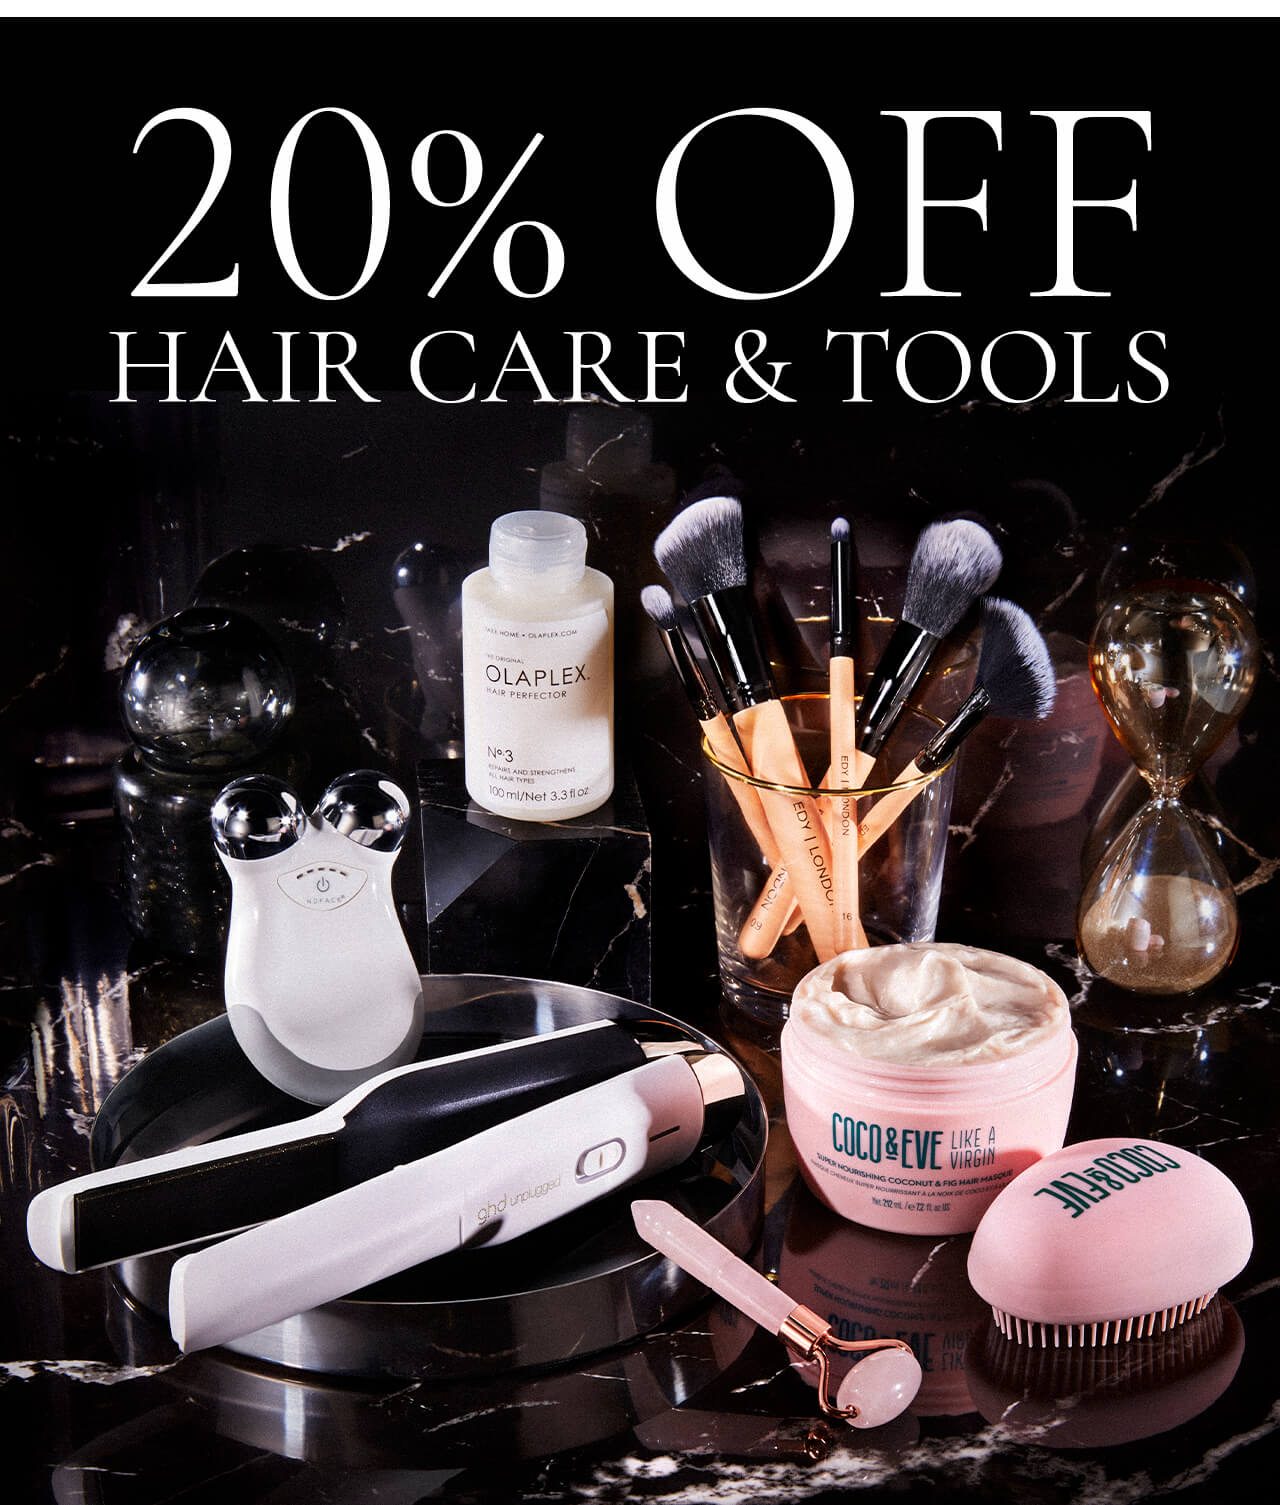 20% OFF HAIR CARE & TOOLS